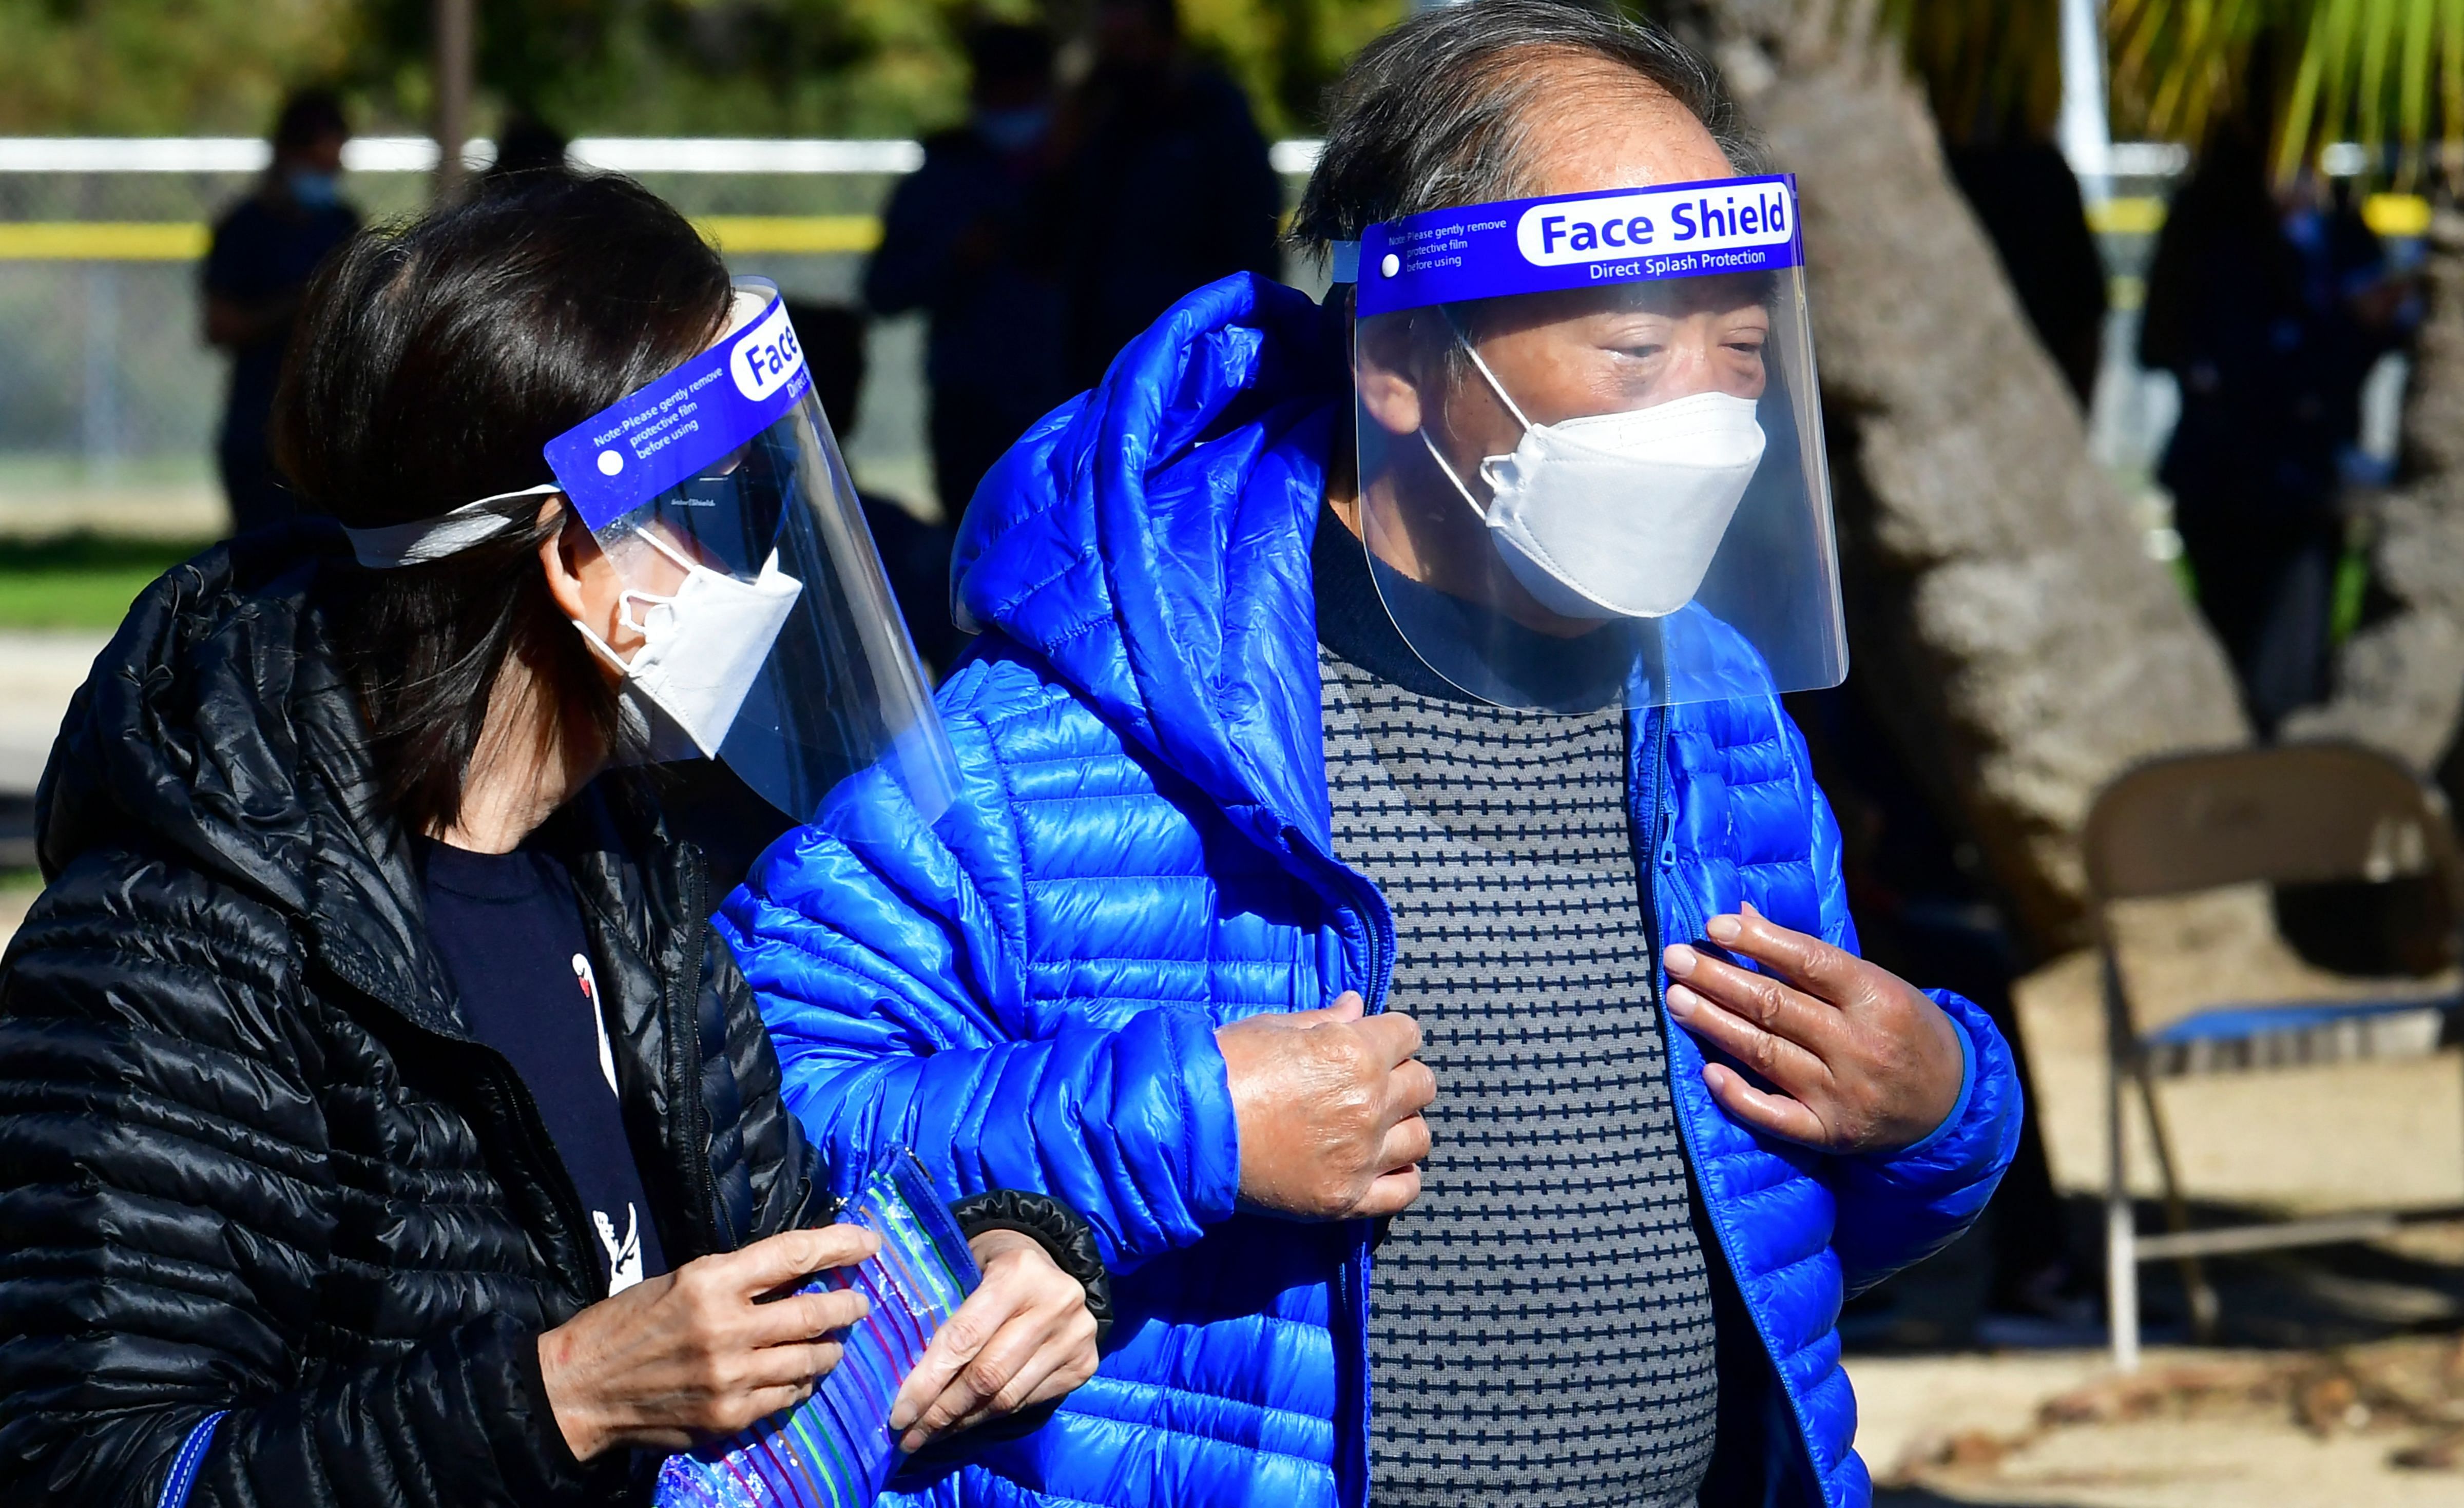 Elderly Asian Americans wear face shields and masks at a Covid-19 vaccination site in Los Angeles, California on February 23, 2021. - City-wide vaccination sites reopened after a temporary shutdown due to inclement weather which affected transportation of the vaccine. A California program meant to improve availability of Covid-19 vaccines in underserved minority communities is reportedly being misused by people in wealthier areas of Los Angeles, grabbing appointments reserved for residents of Black and Latino neighborhoods, according to a Los Angeles Times report on February 22. Credit: AFP Photo